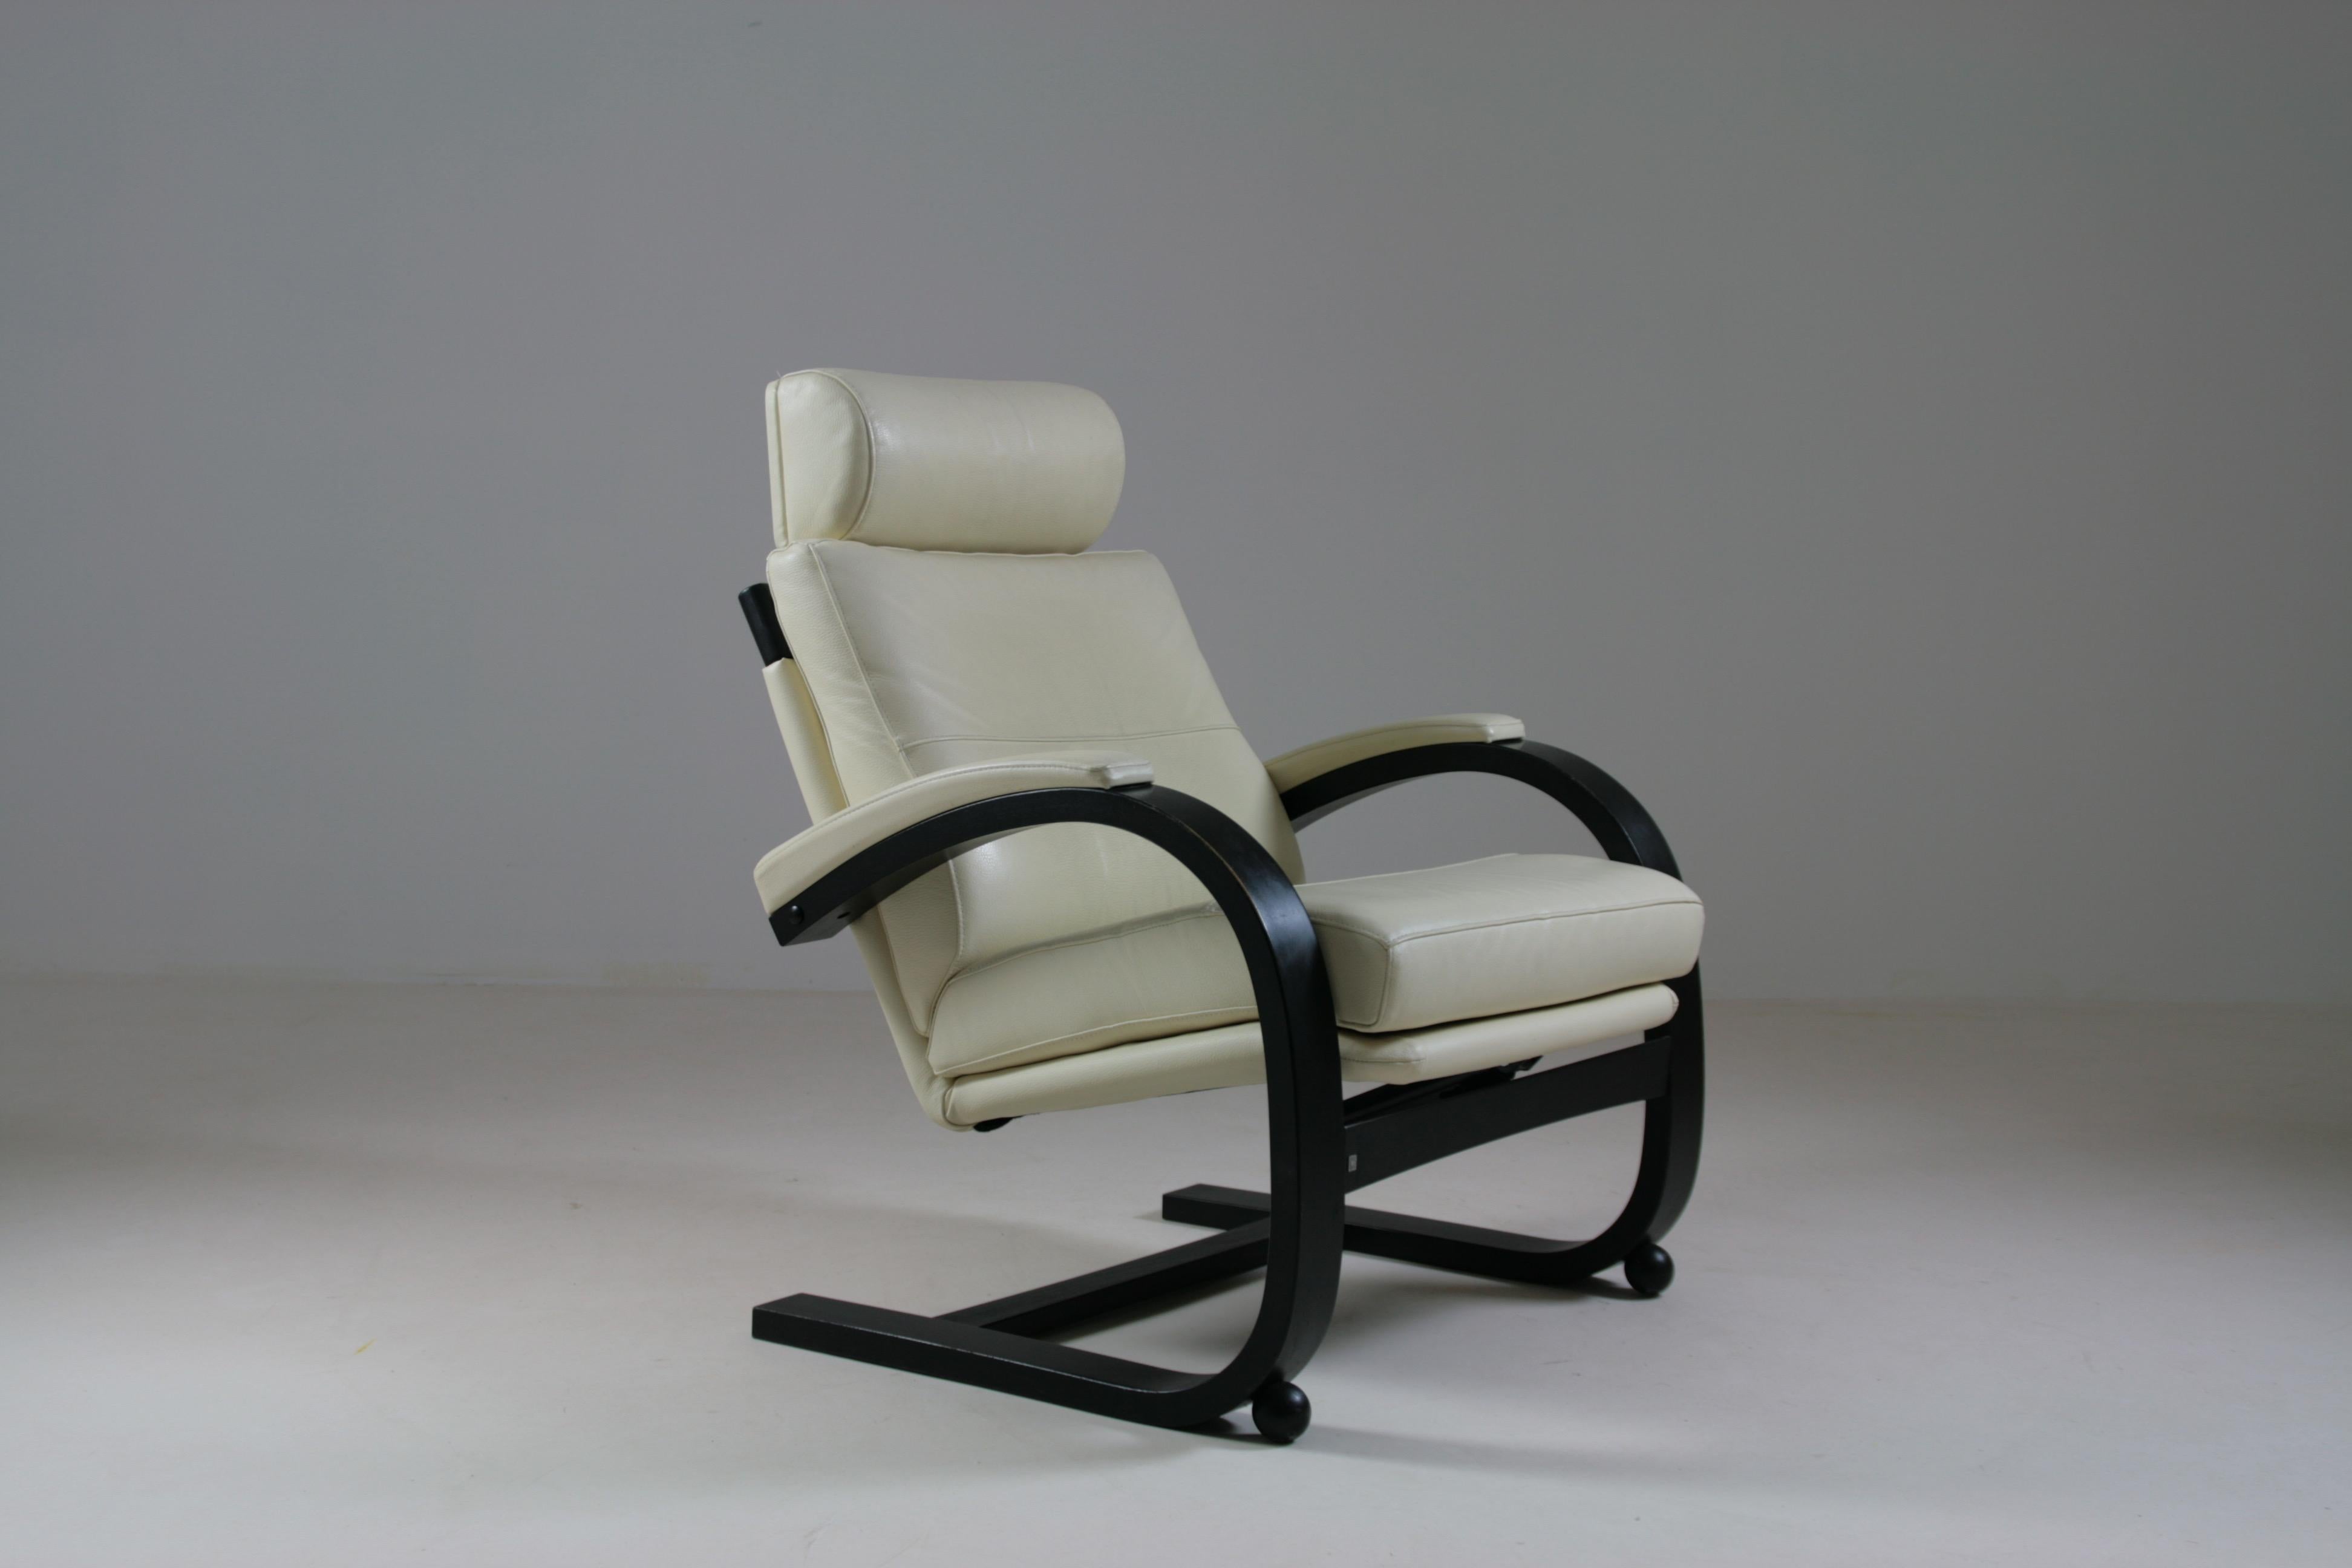 Nelo Swedish leather recliner armchair by åke fribyter For Sale 3